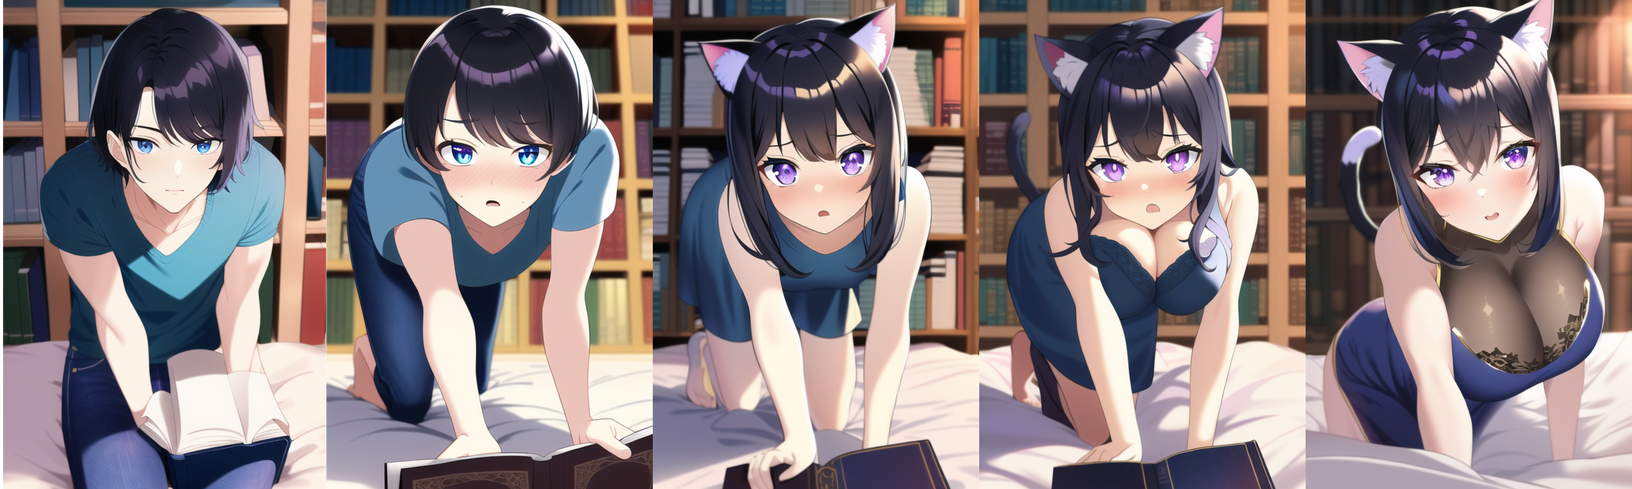 Real Life Anime Cat Girl by TFwulfet